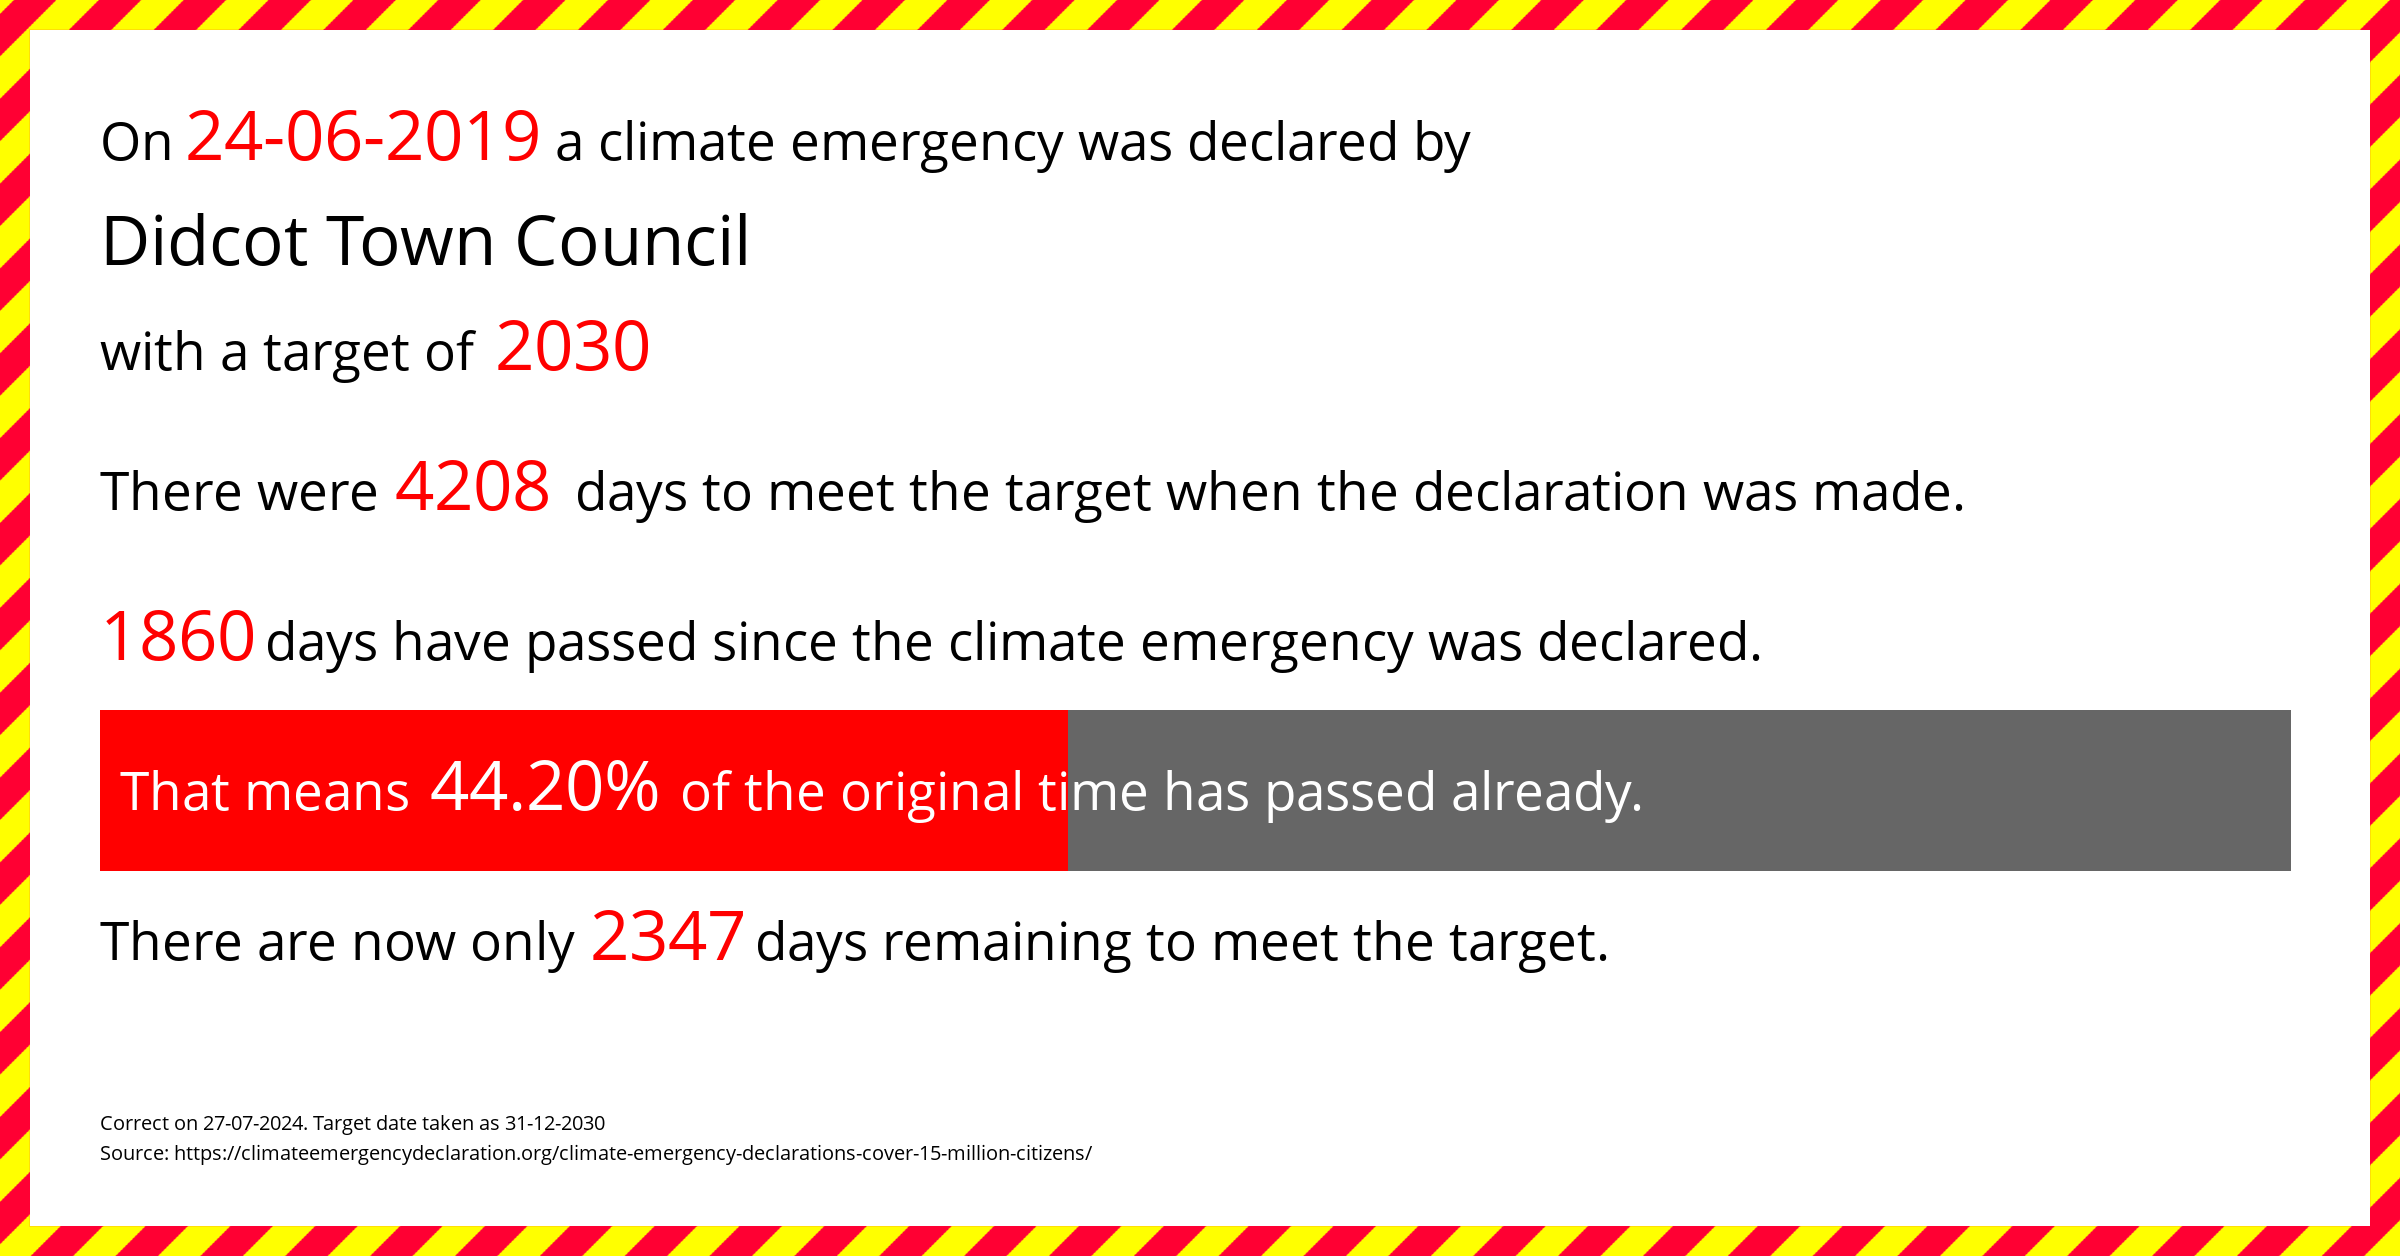 Didcot Town Council  declared a Climate emergency on Monday 24th June 2019, with a target of 2030.